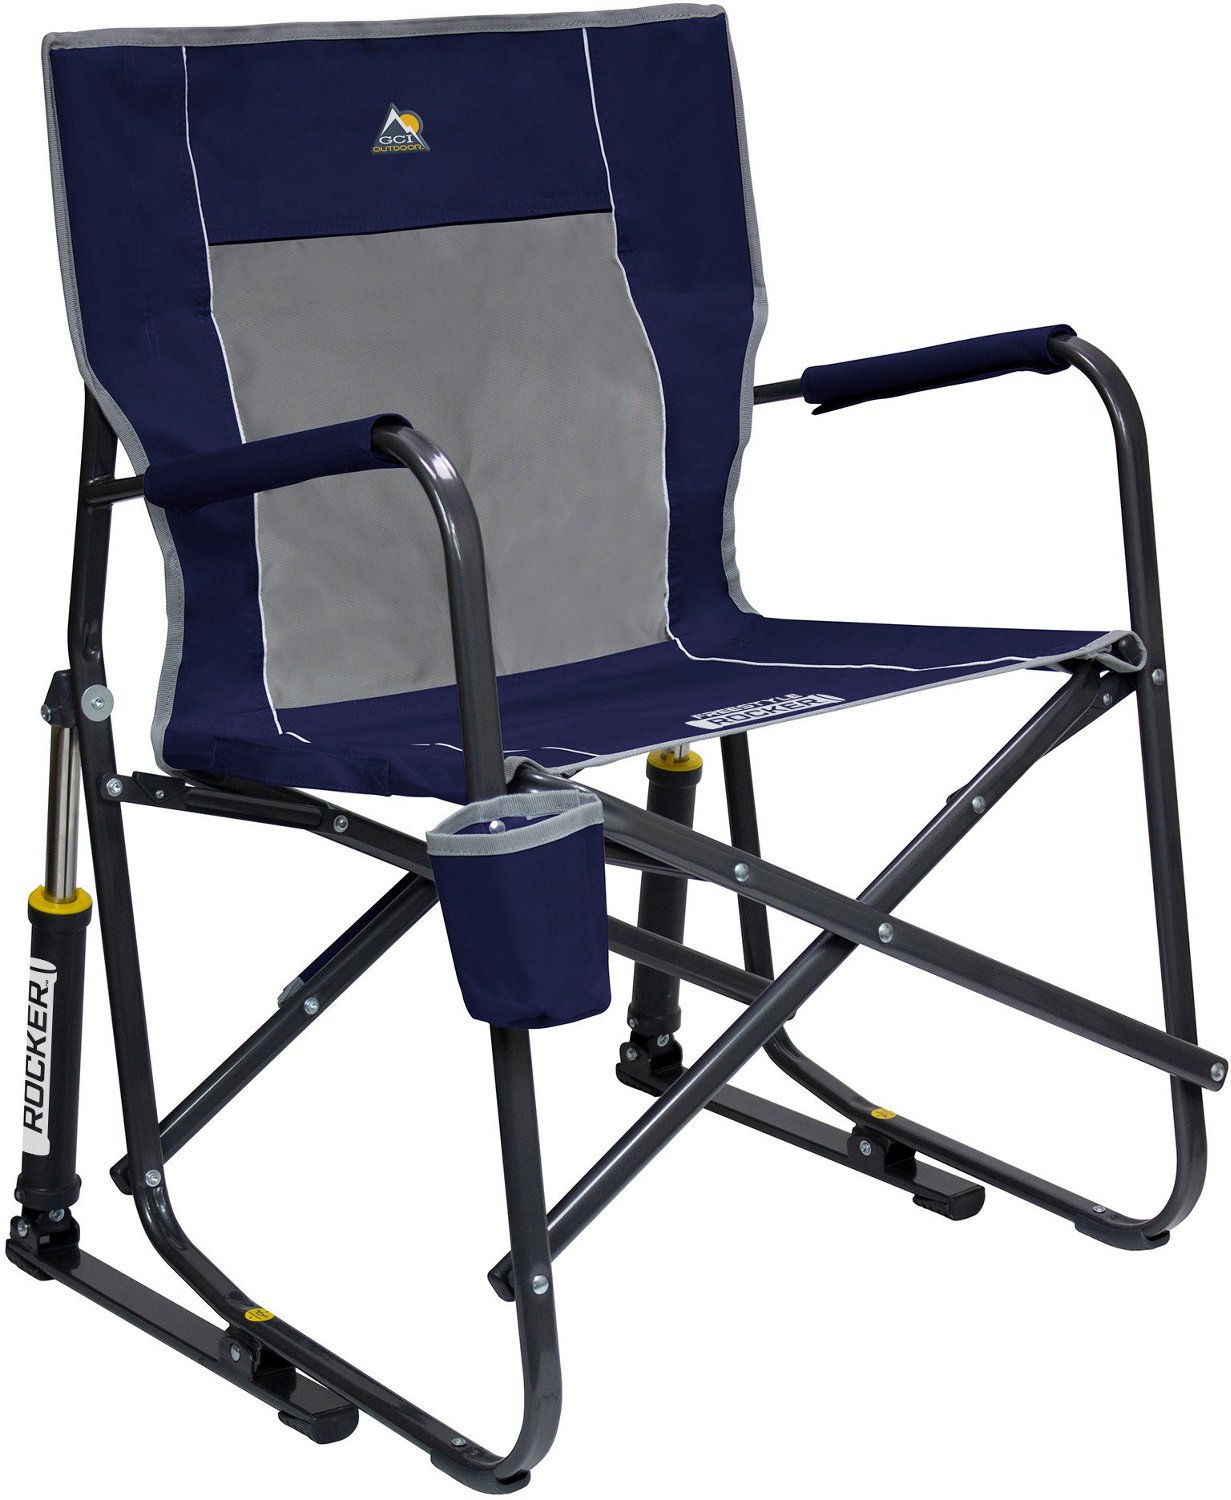 Foldable Chairs | Folding Chairs 